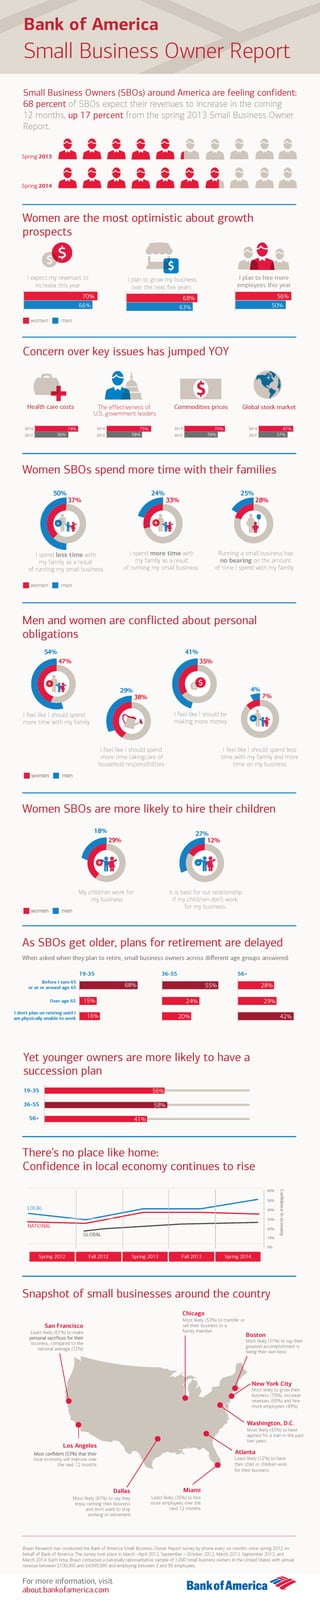 Small Business Owner Report Infographic - Spring 2014 Bank of America